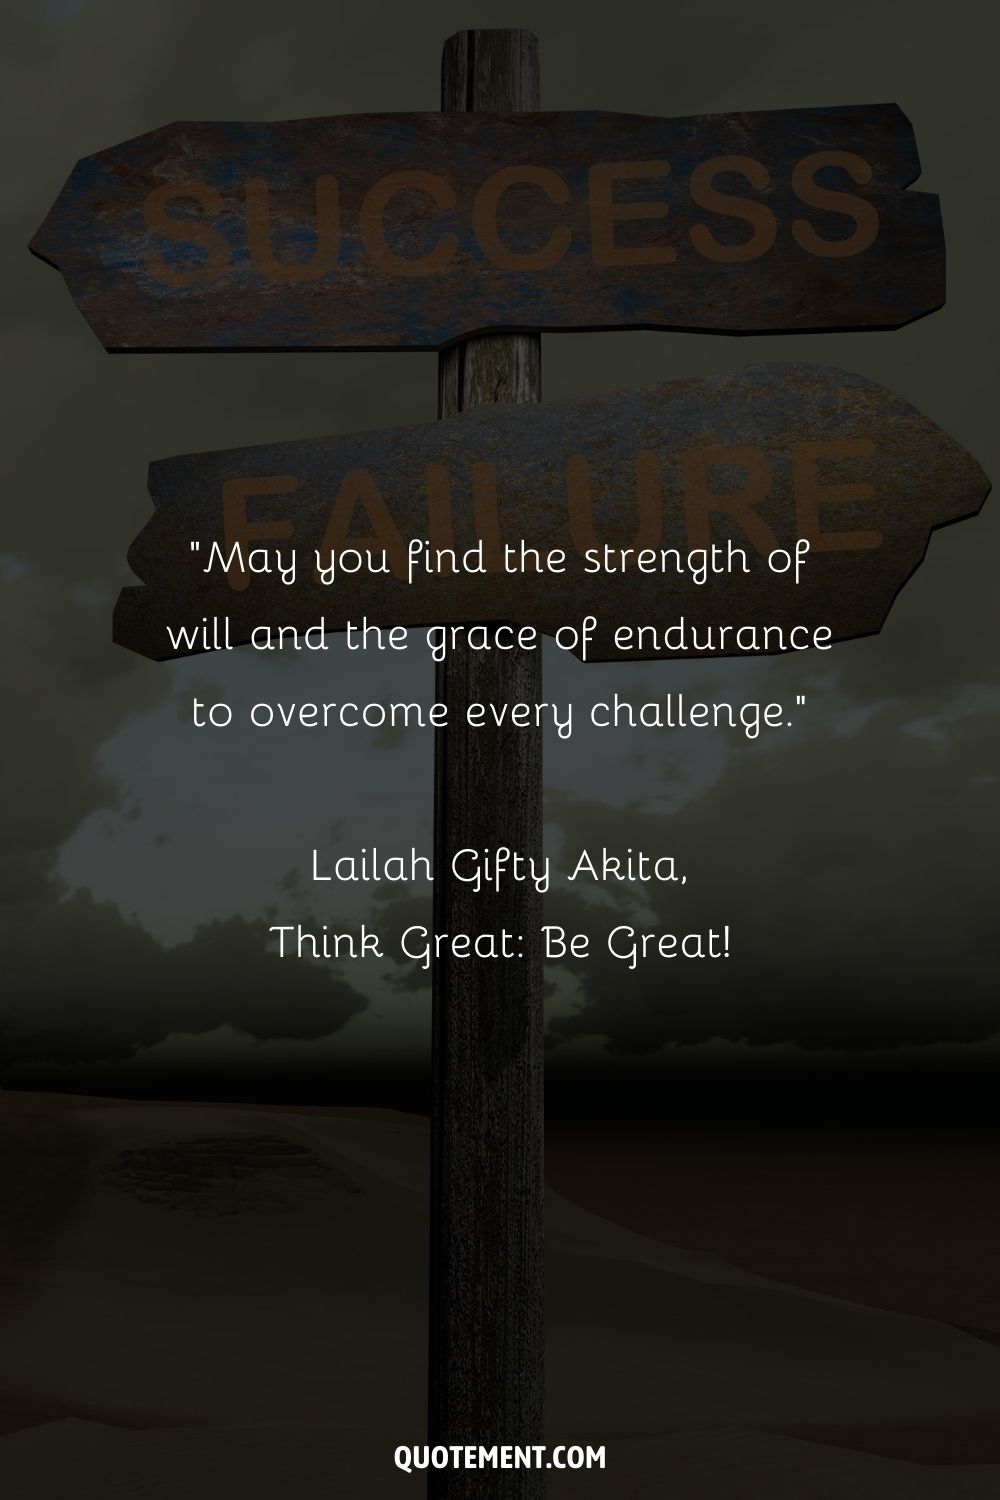 “May you find the strength of will and the grace of endurance to overcome every challenge.” ― Lailah Gifty Akita, Think Great Be Great!